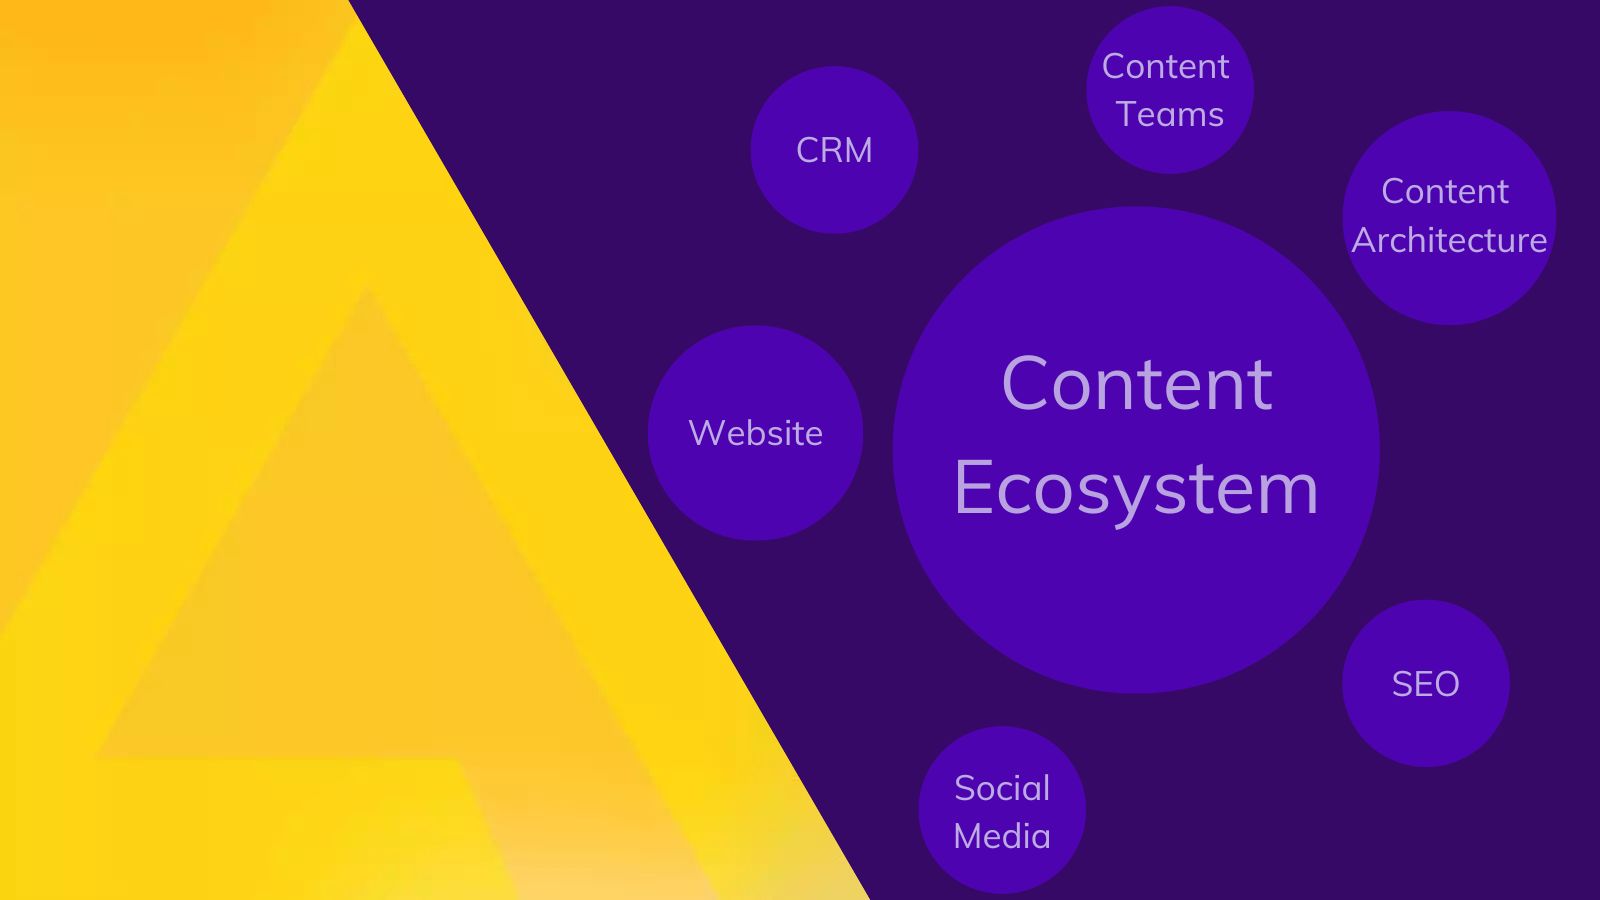 What is a Content Ecosystem?